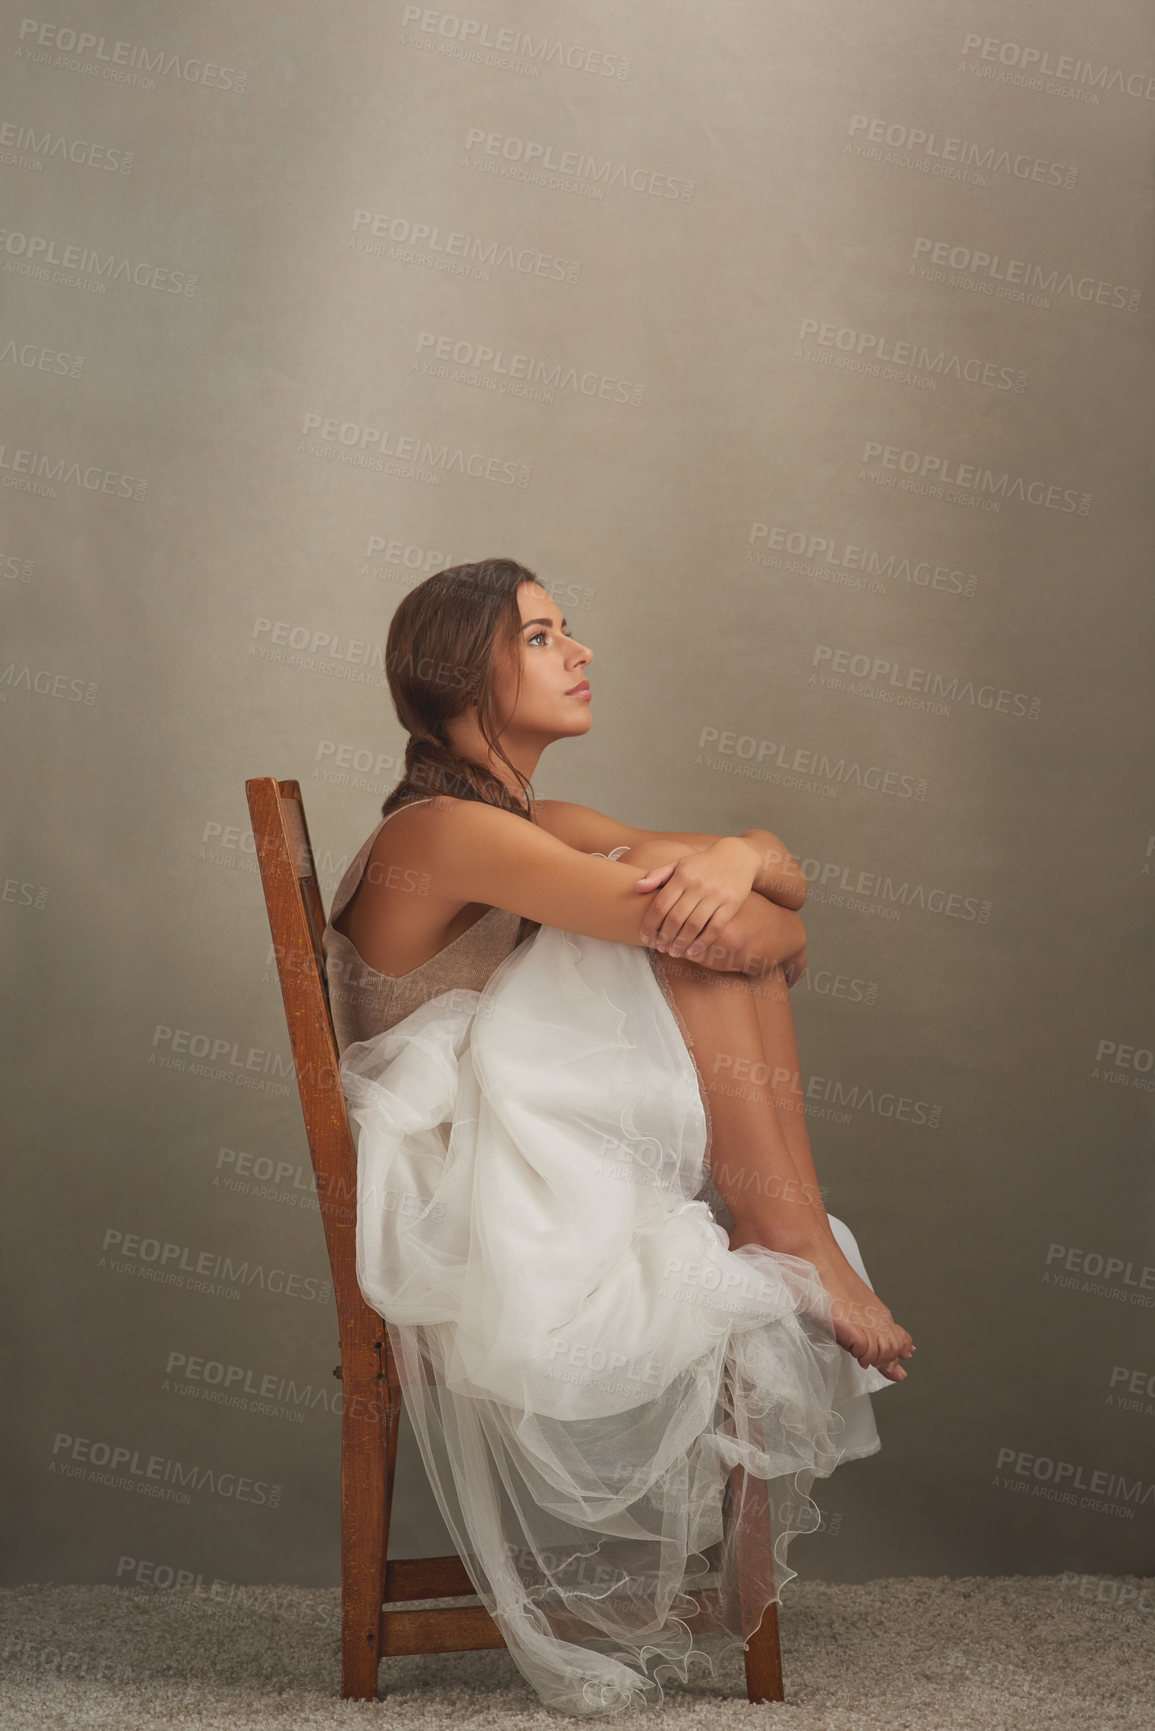 Buy stock photo Studio shot of an attractive young woman looking thoughtful while sitting on a chair